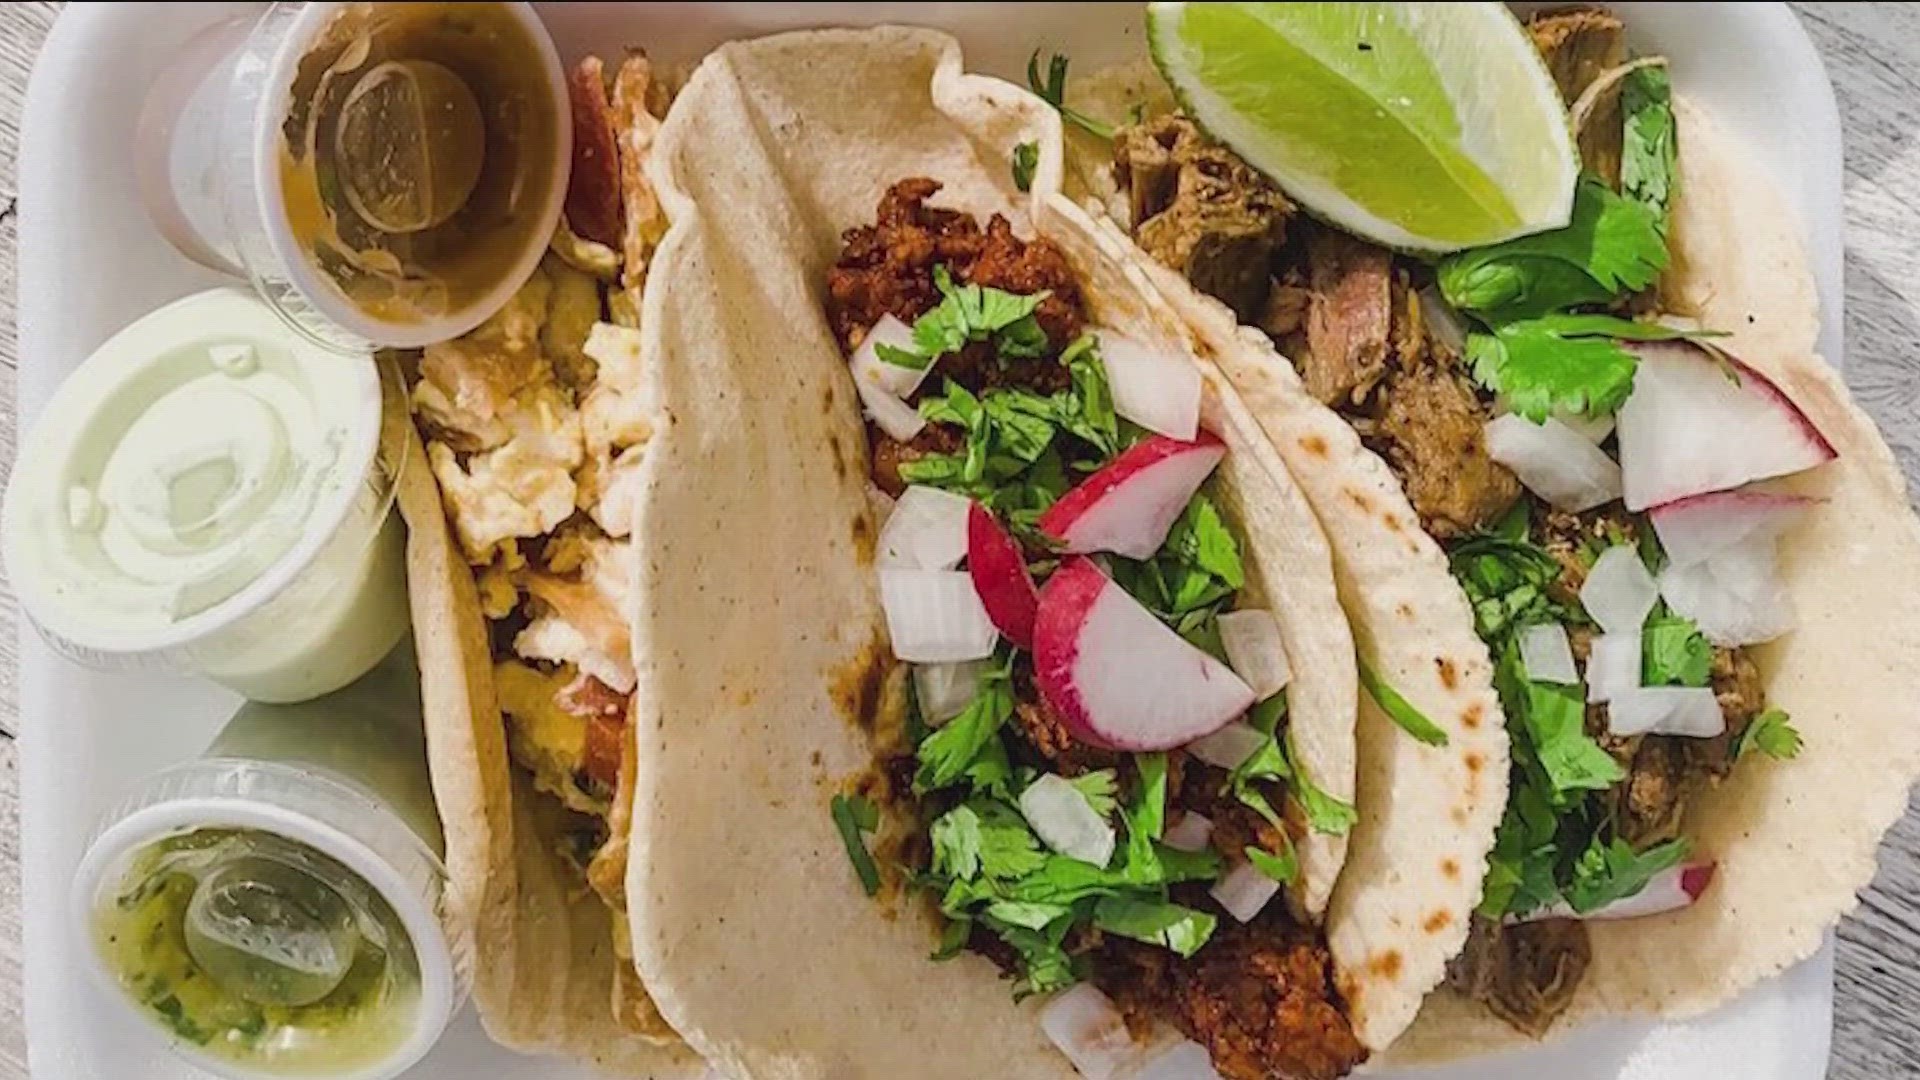 Austin is known for its tacos and how much we love them. Now we have the title to prove it!